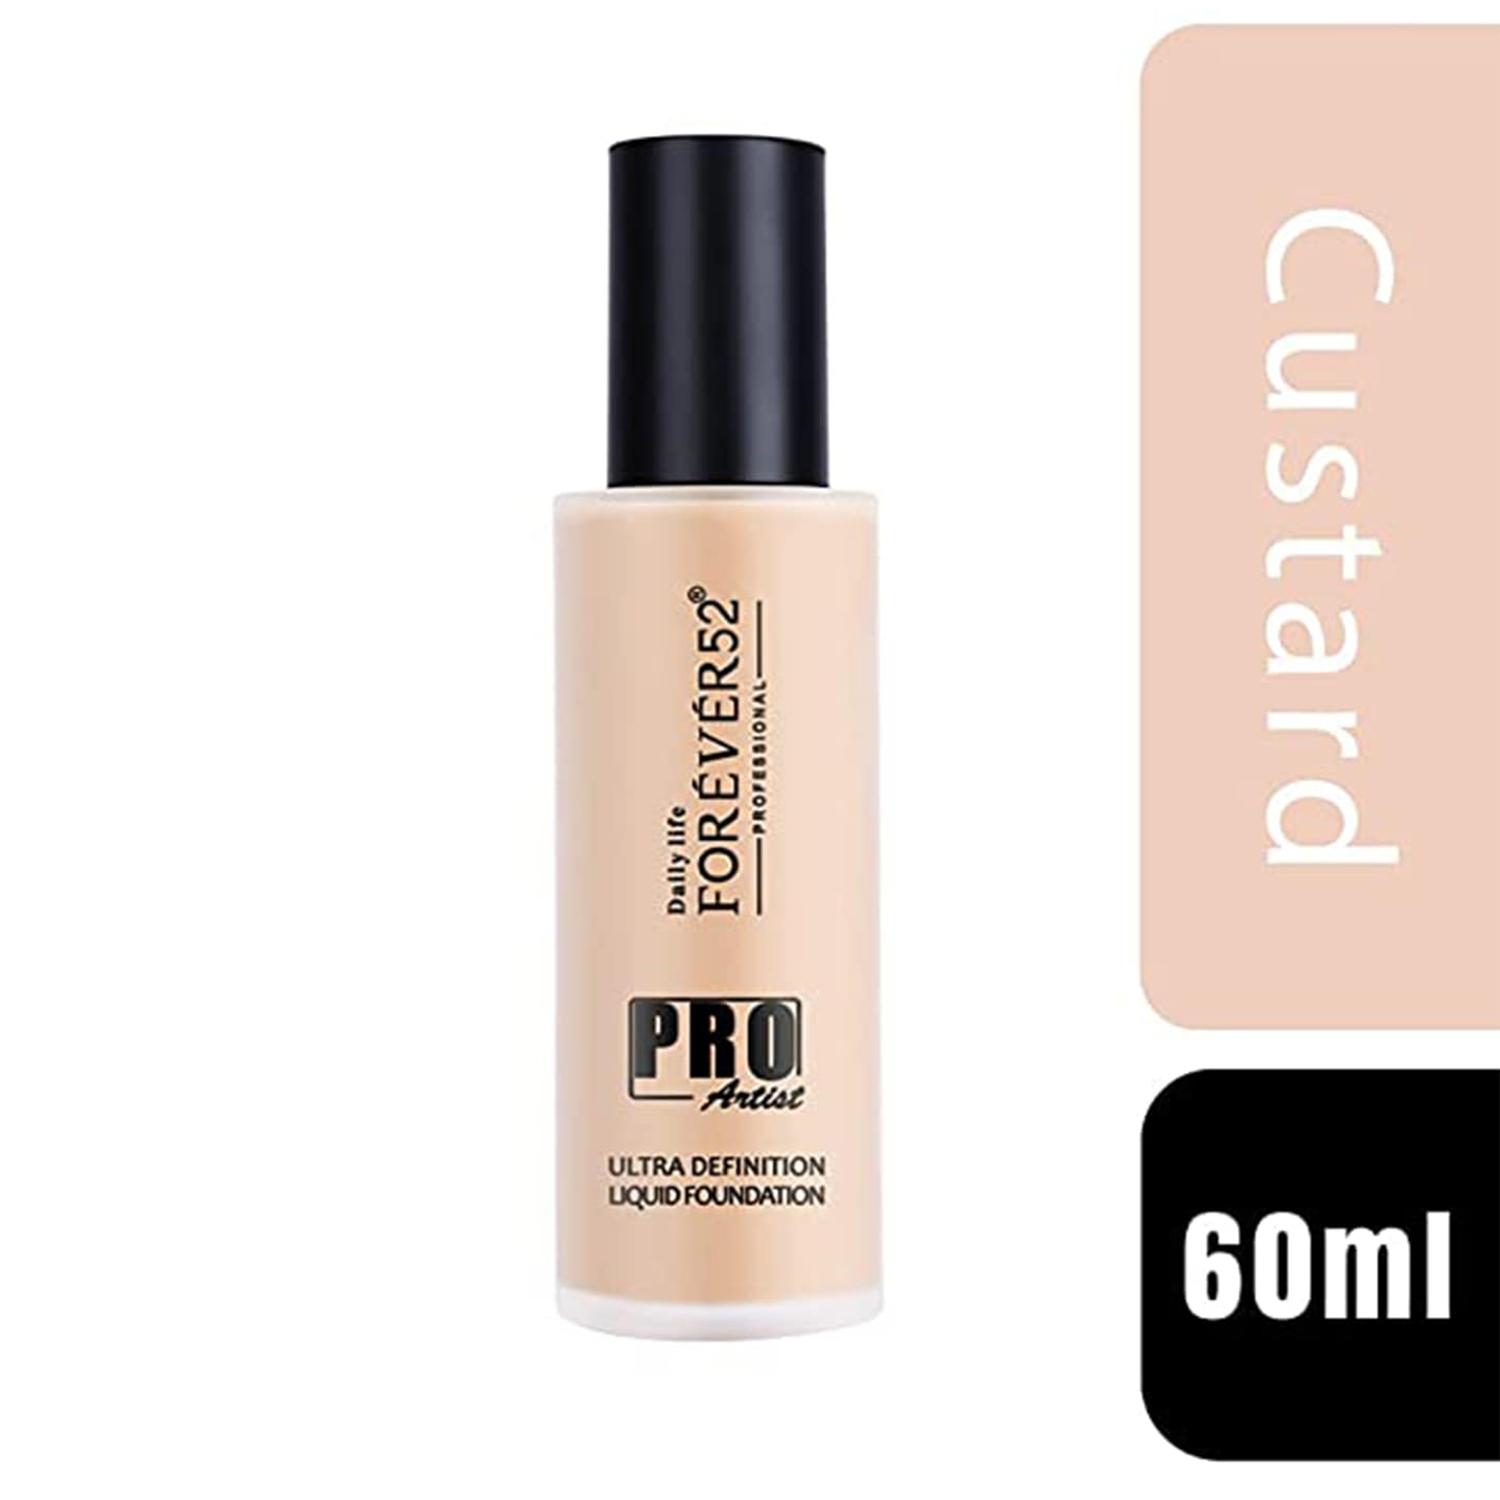 Daily Life Forever52 | Daily Life Forever52 Pro Artist Ultra Definition Liquid Foundation BUF002 - Custard (60ml)